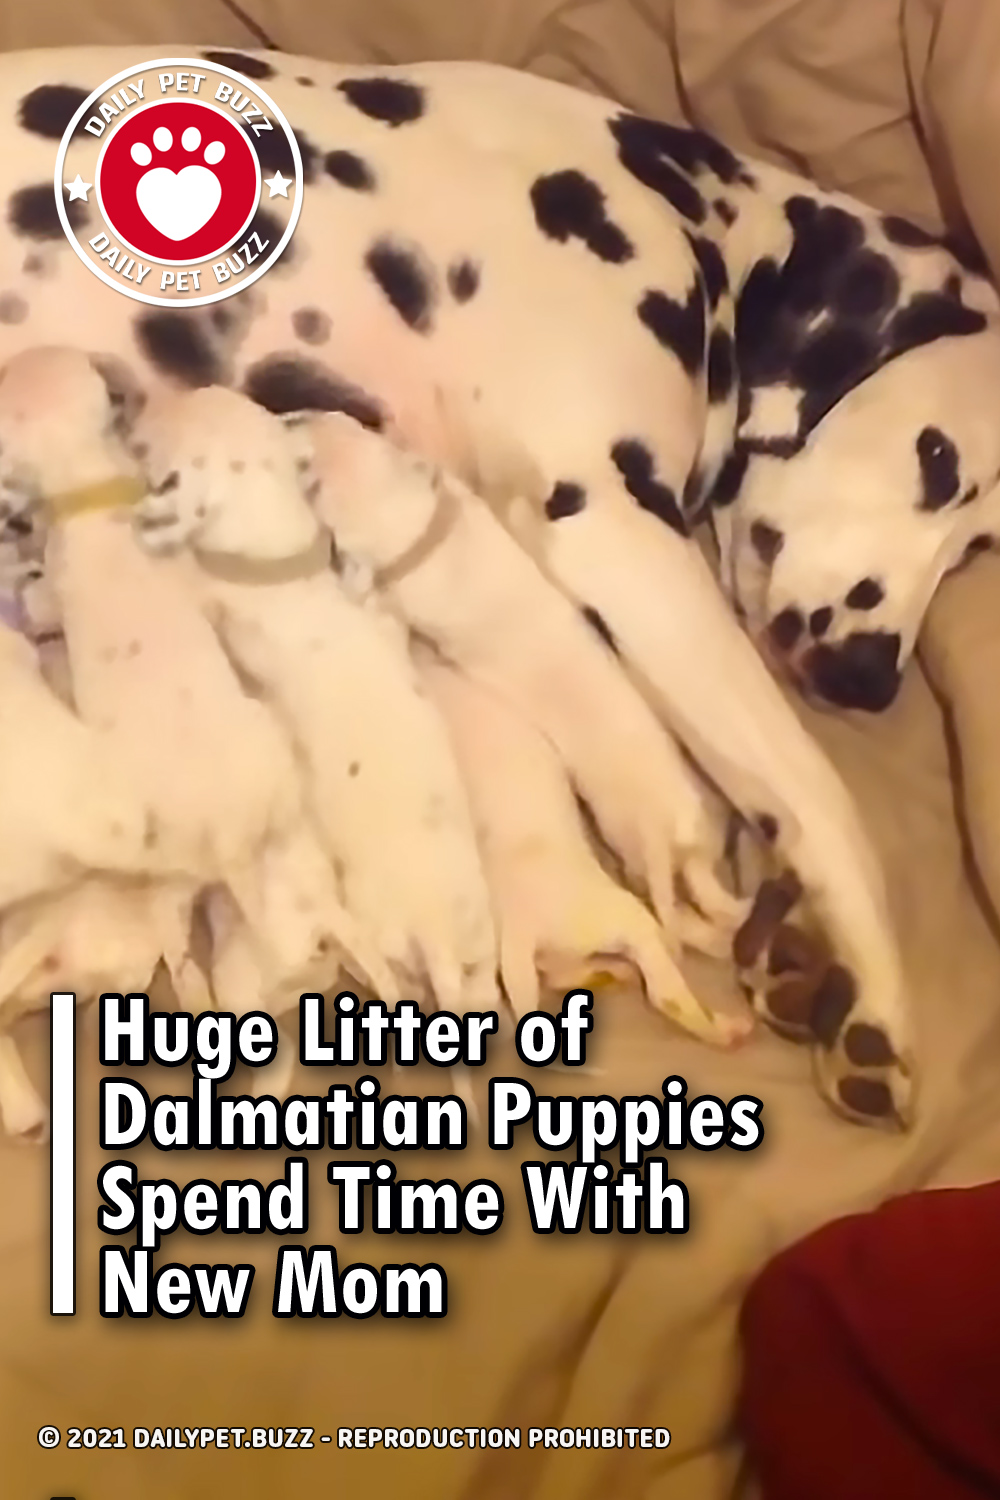 Huge Litter of Dalmatian Puppies Spend Time With New Mom